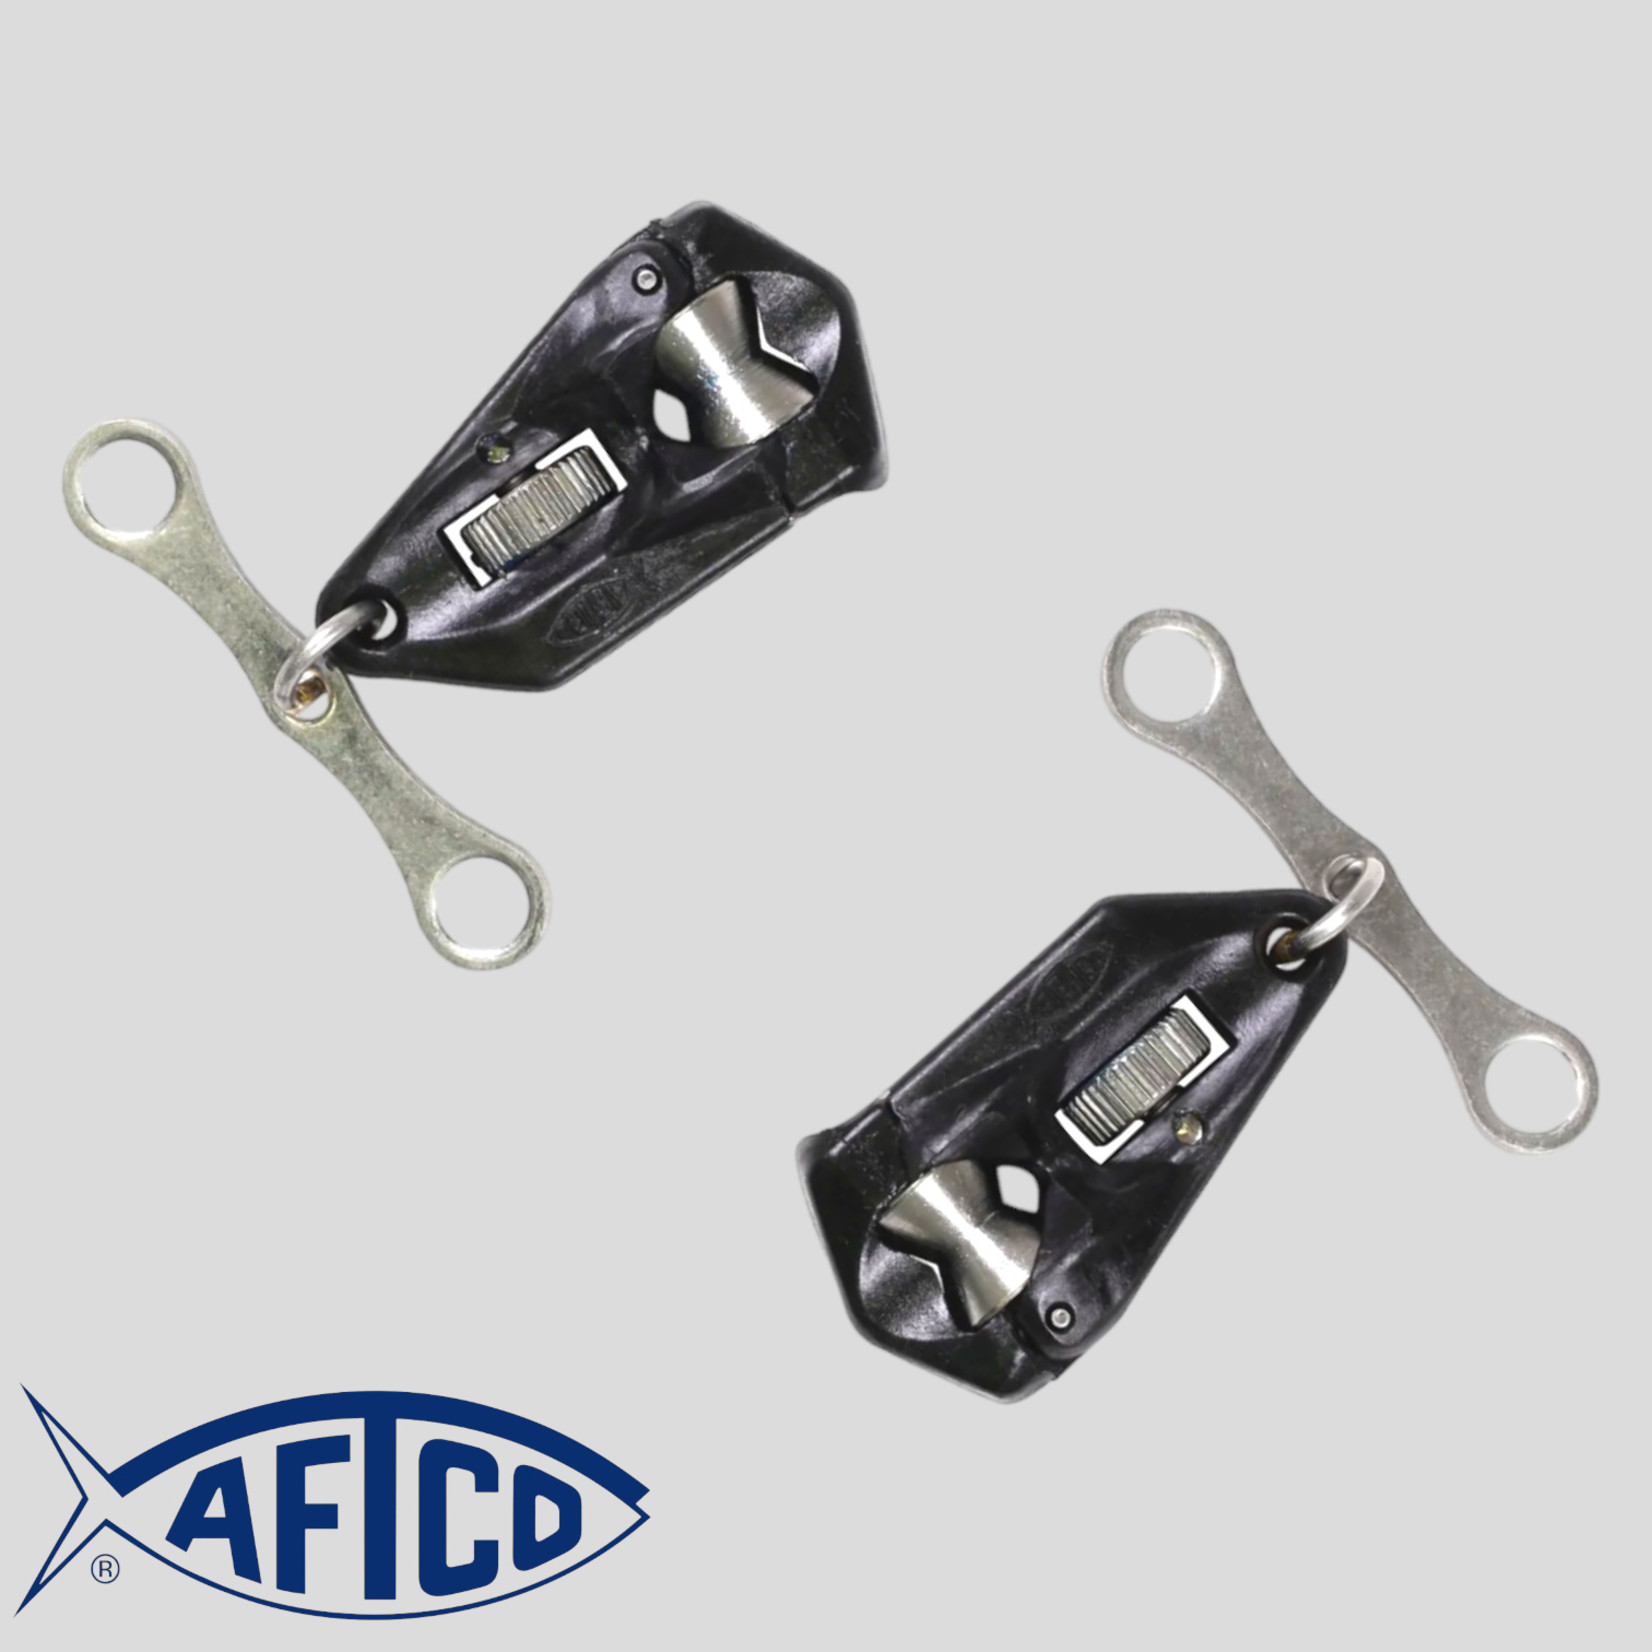 Aftco Aftco Roller Troller Release Clips